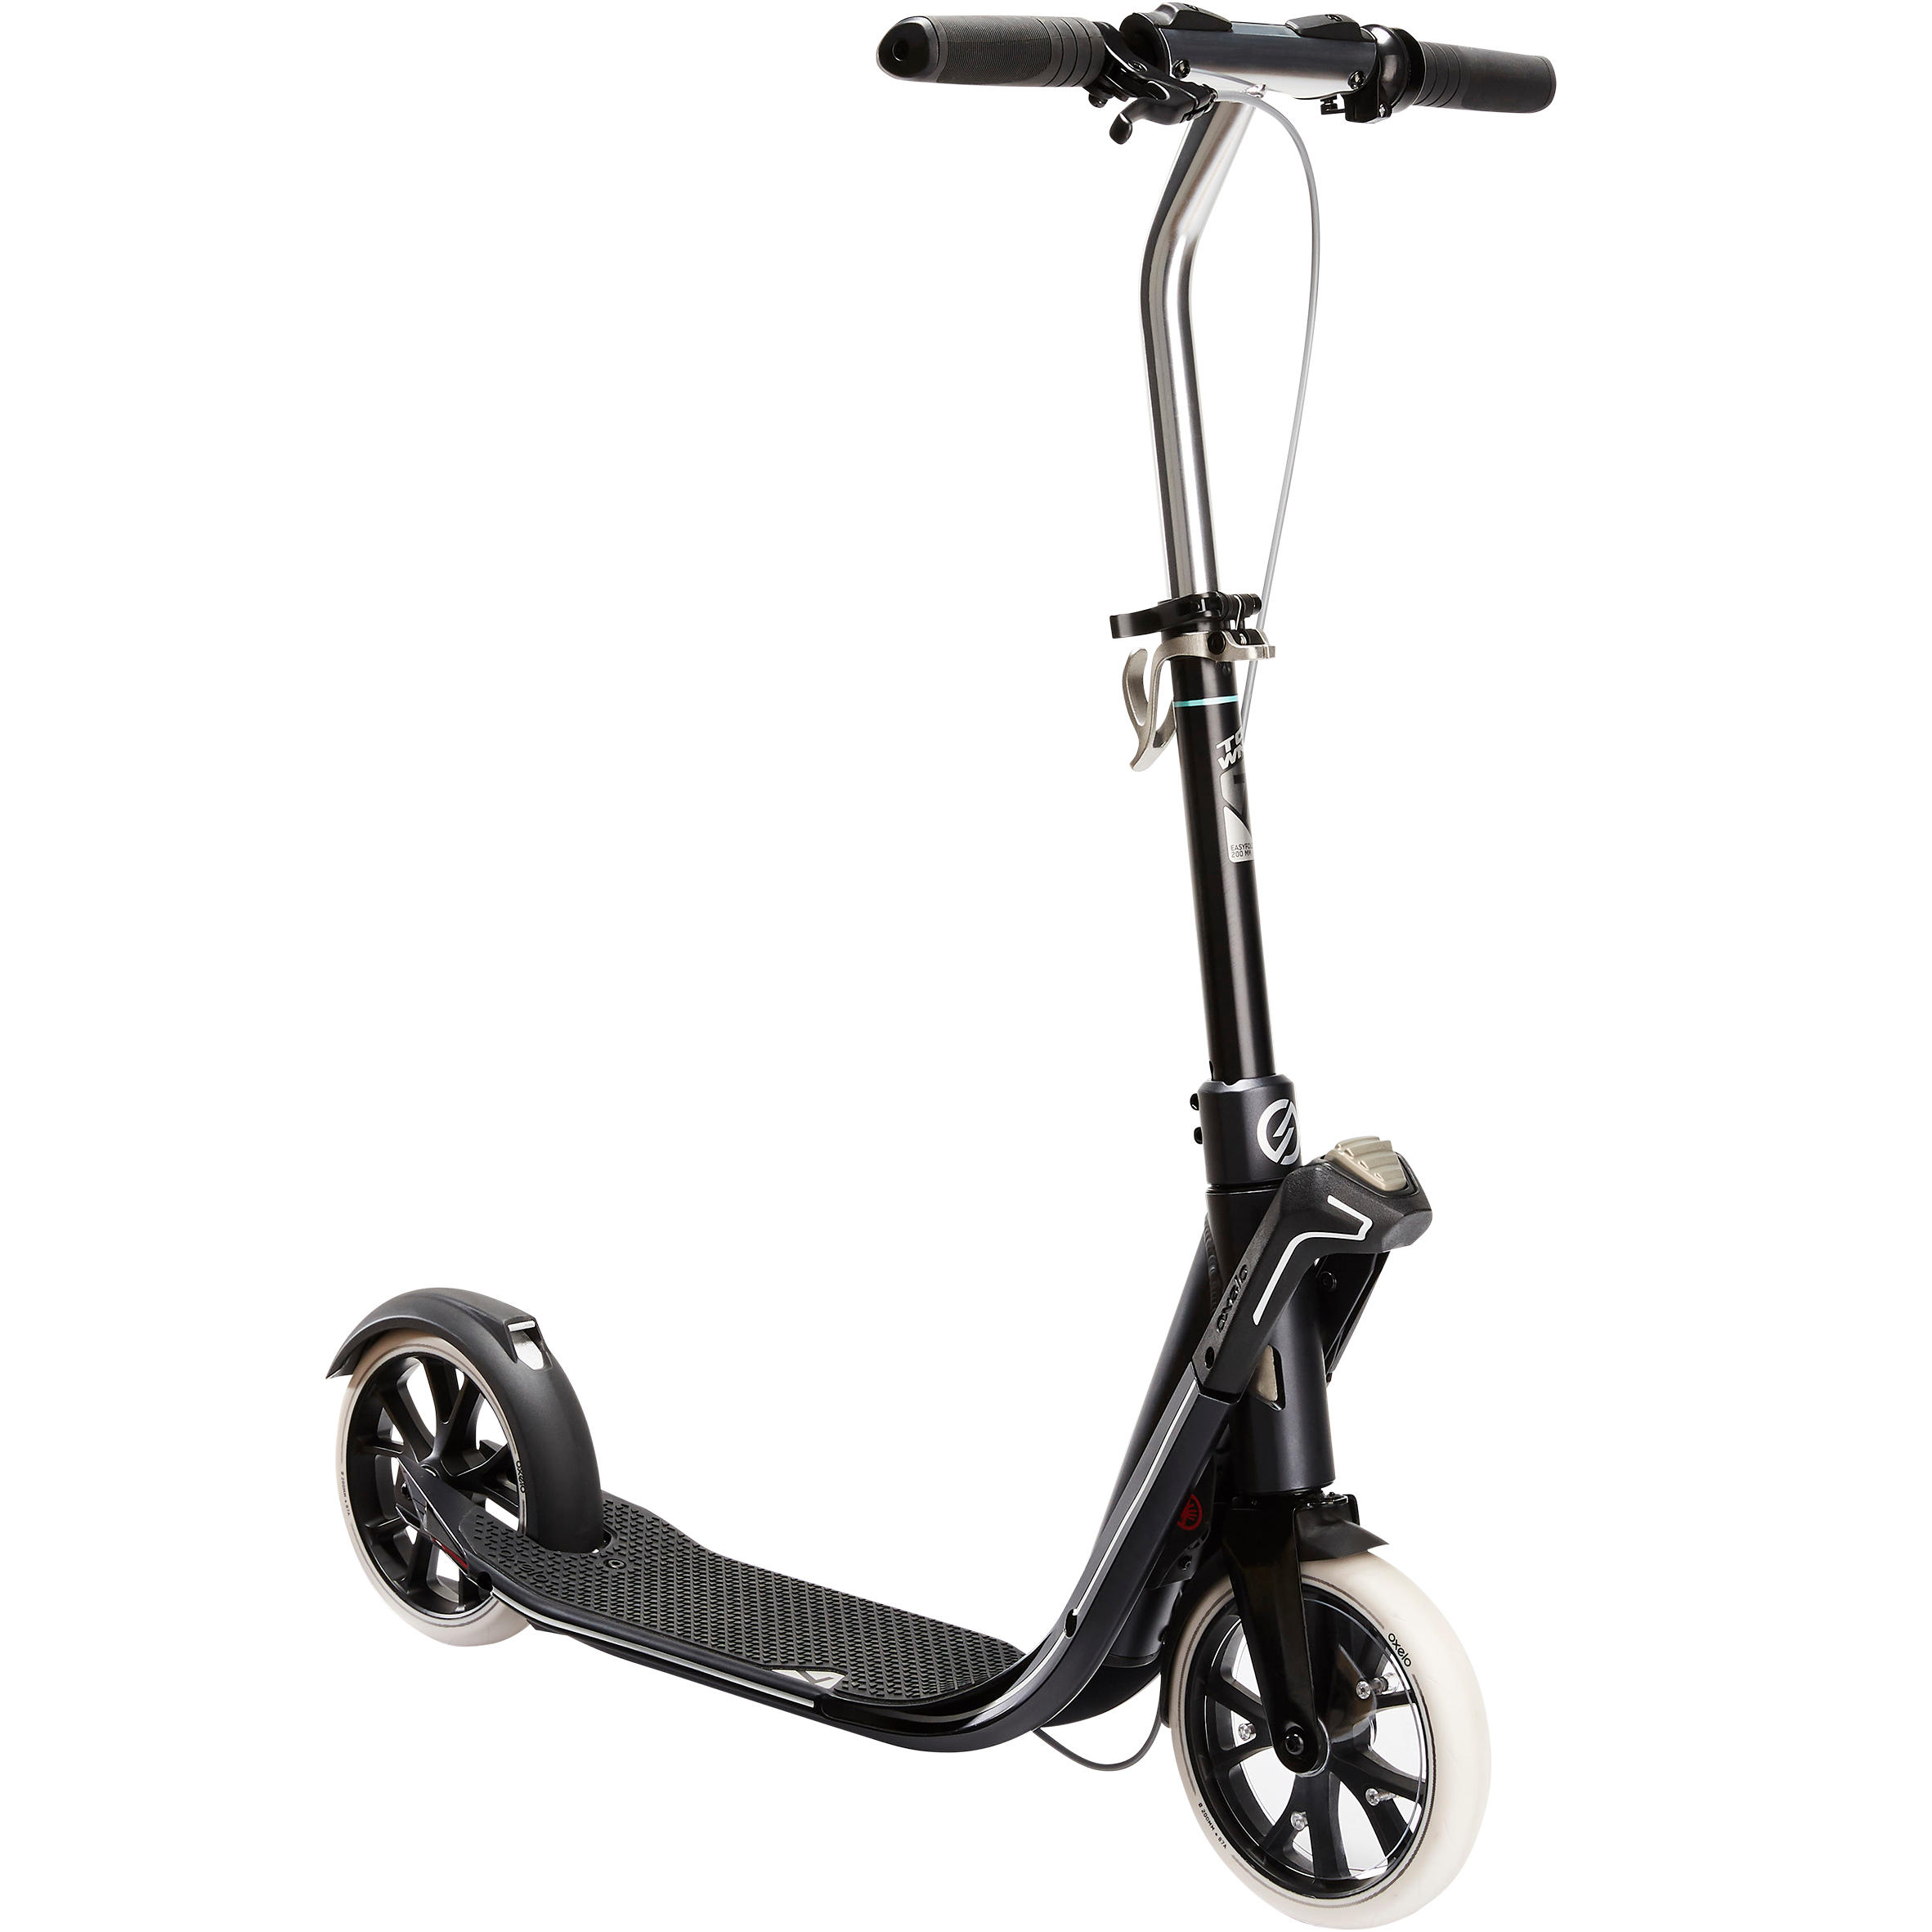 Town 7 EF V2 Adult Scooter OXELO 